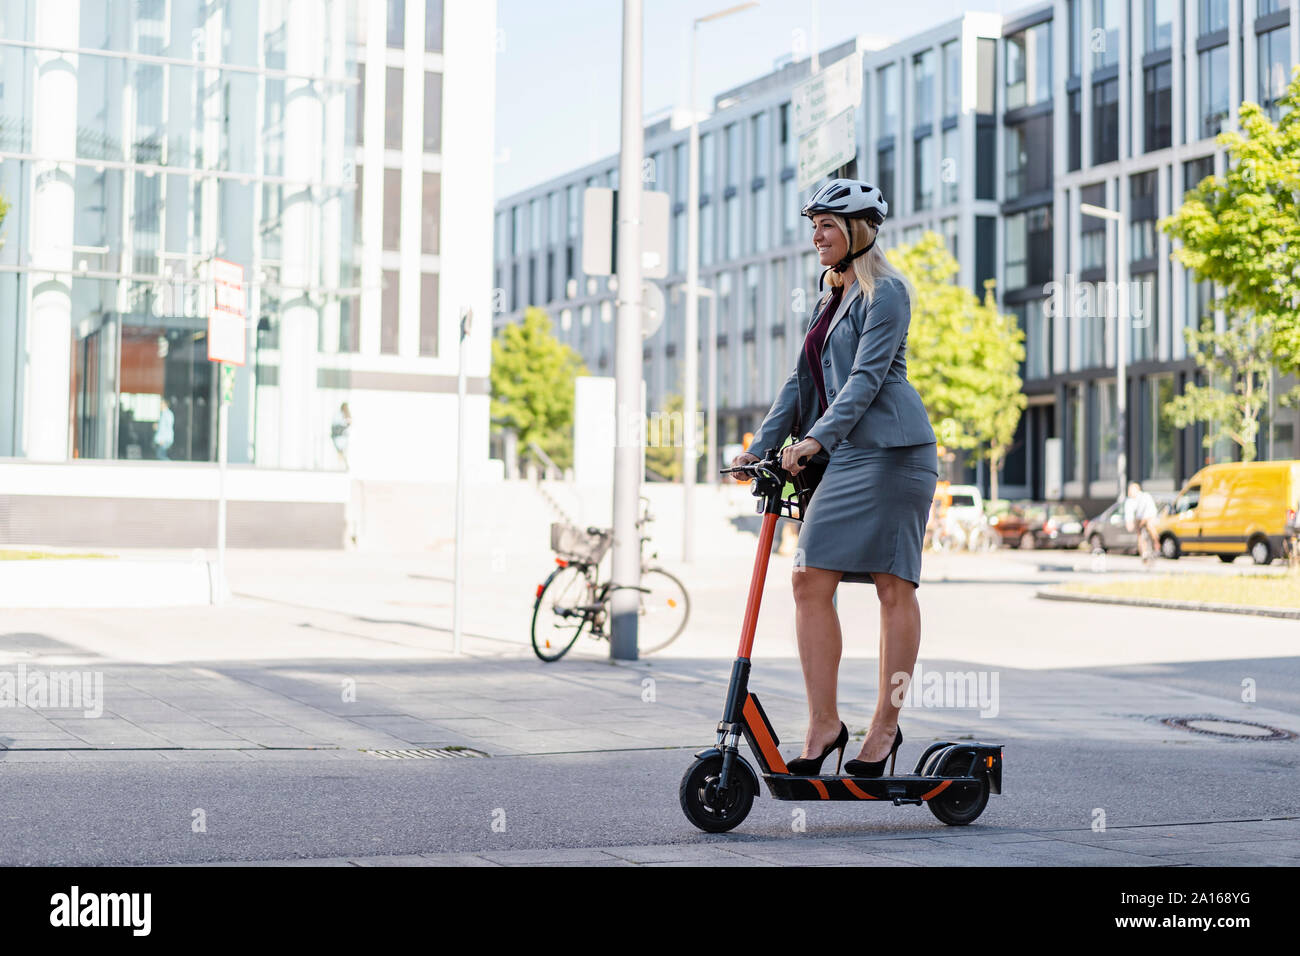 Smiling businesswoman wearing high heels riding electric scooter on the street Stock Photo